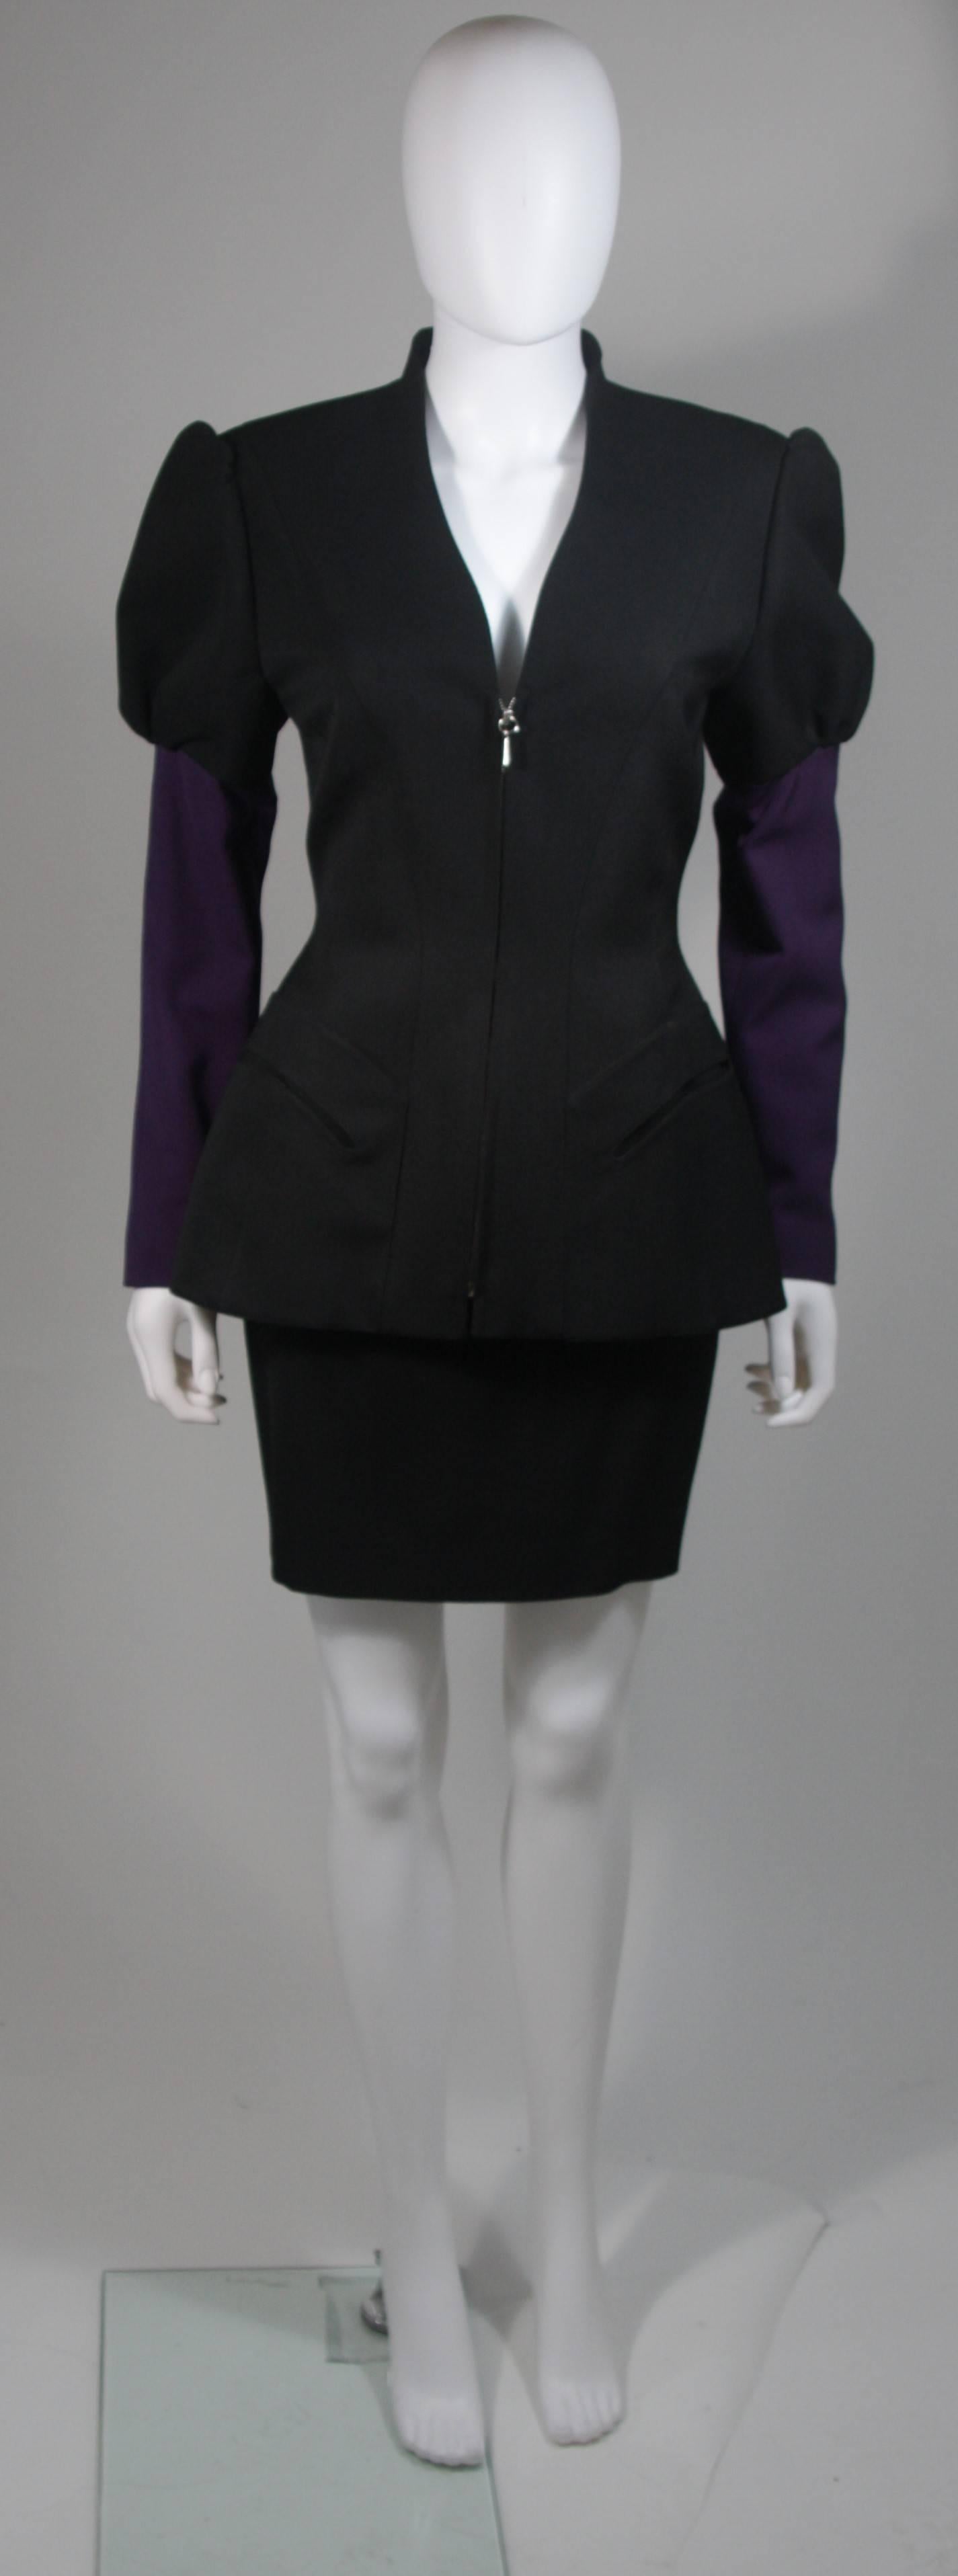  This skirt suit is composed of a black and purple fabric combination. The jacket has a center front zipper closure. The skirt has a classic pencil silhouette with zipper closure. In excellent vintage condition. Made in France. 

  **Please